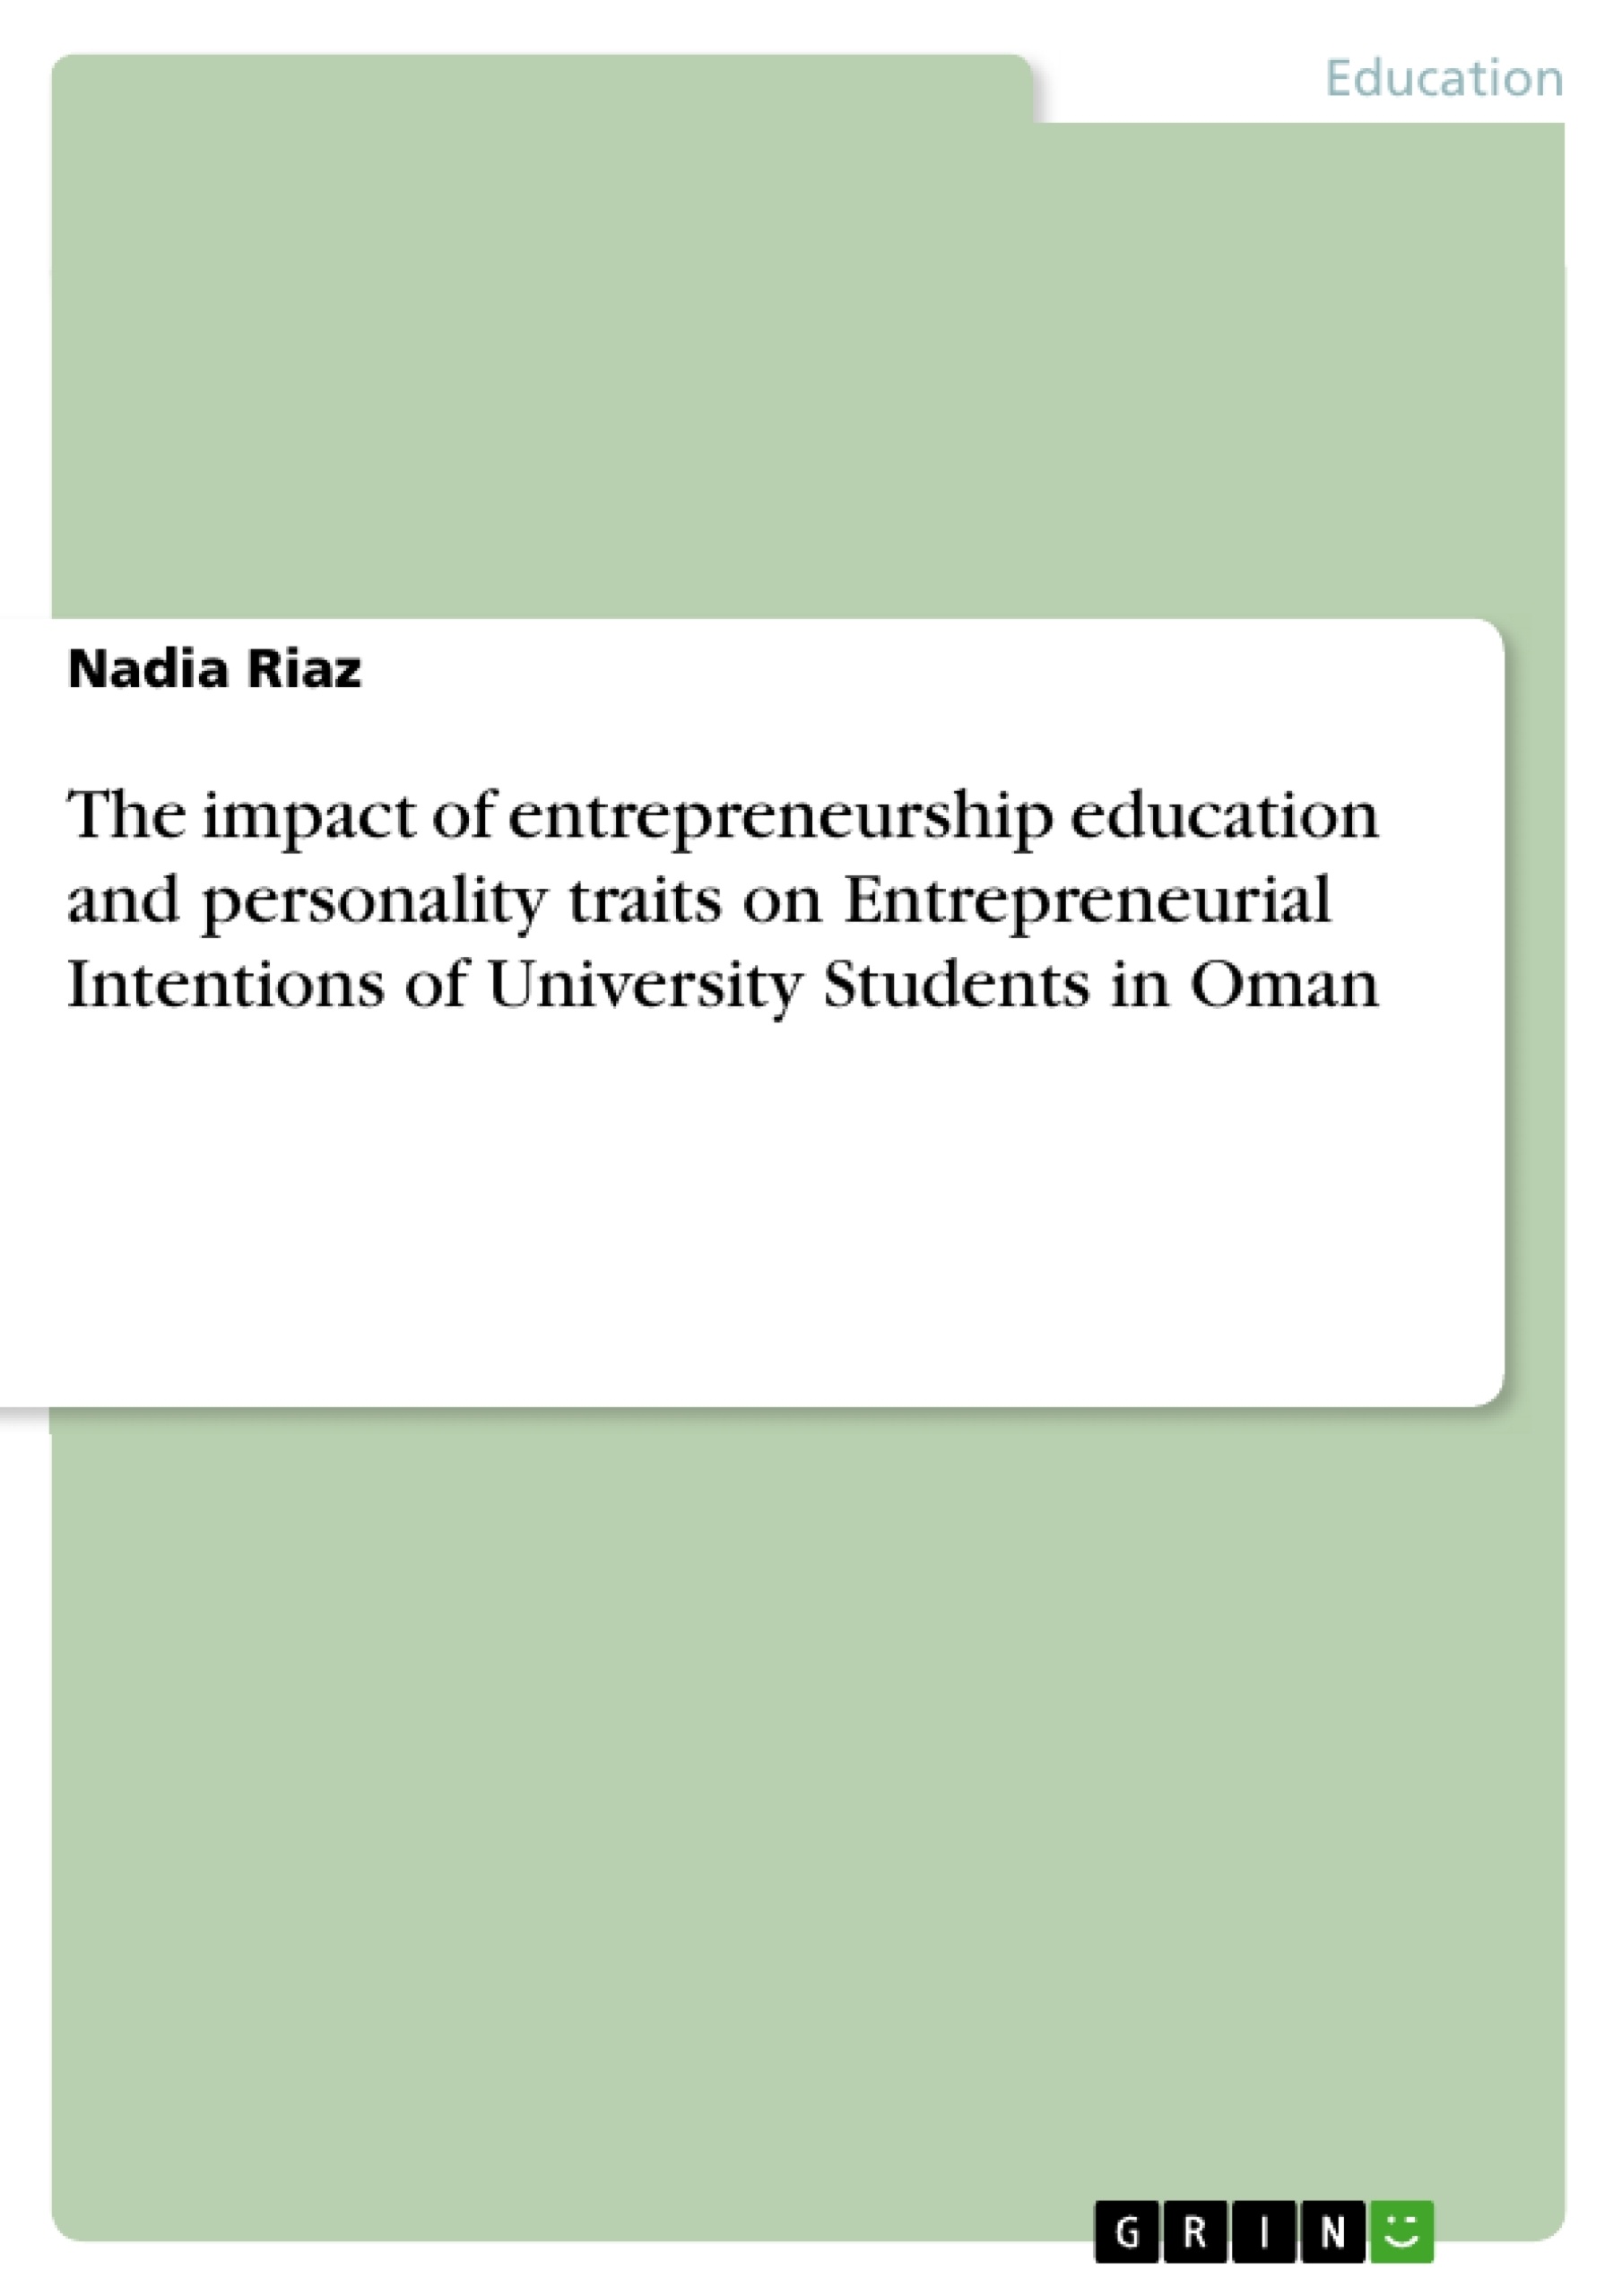 Title: The impact of entrepreneurship education and personality traits on Entrepreneurial Intentions of University Students in Oman